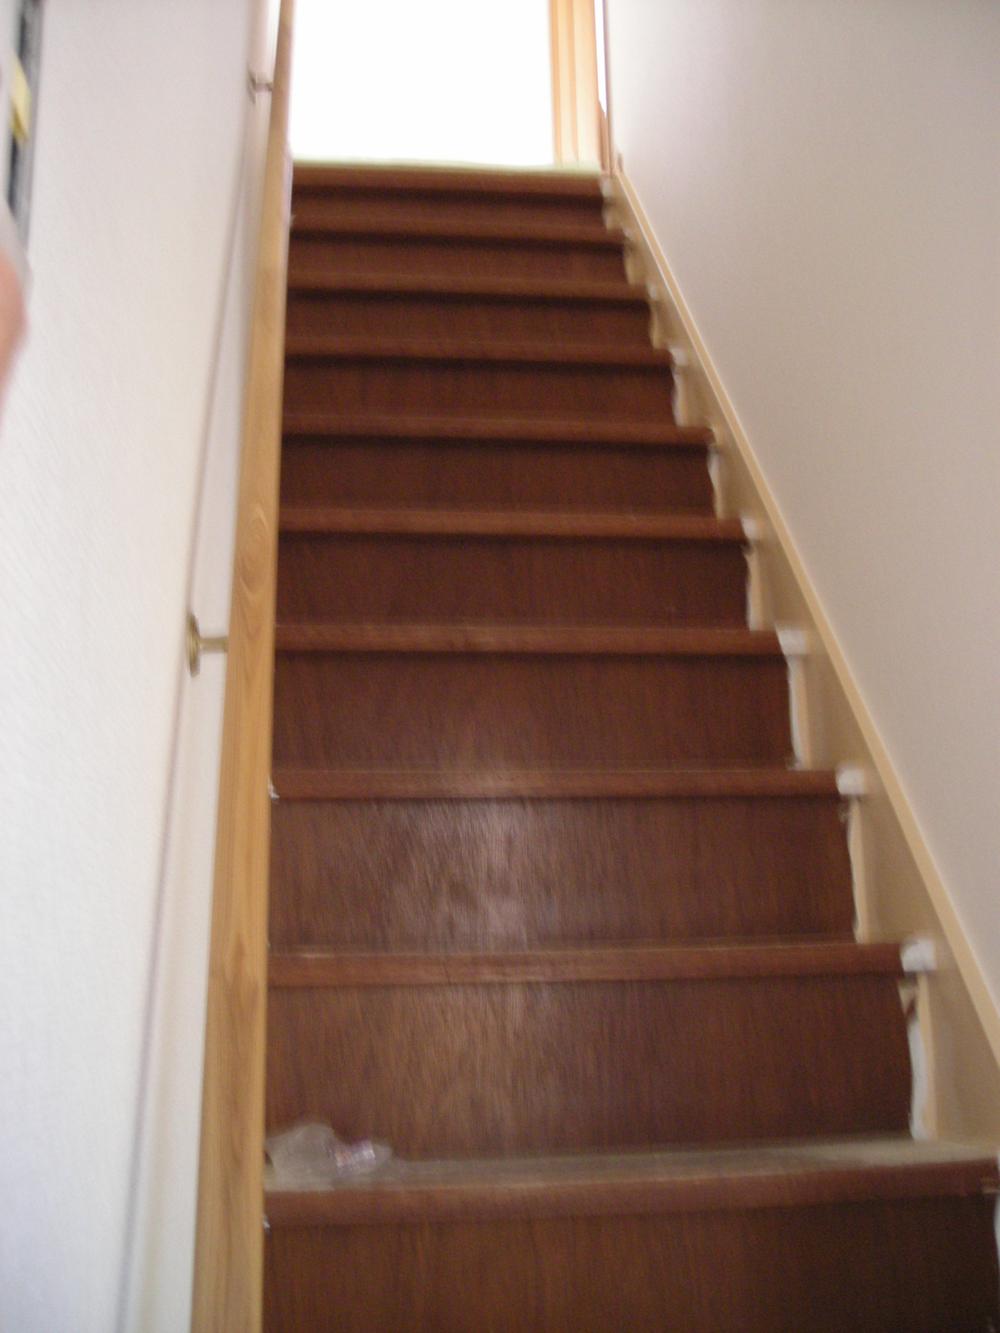 Other. With stair handrail